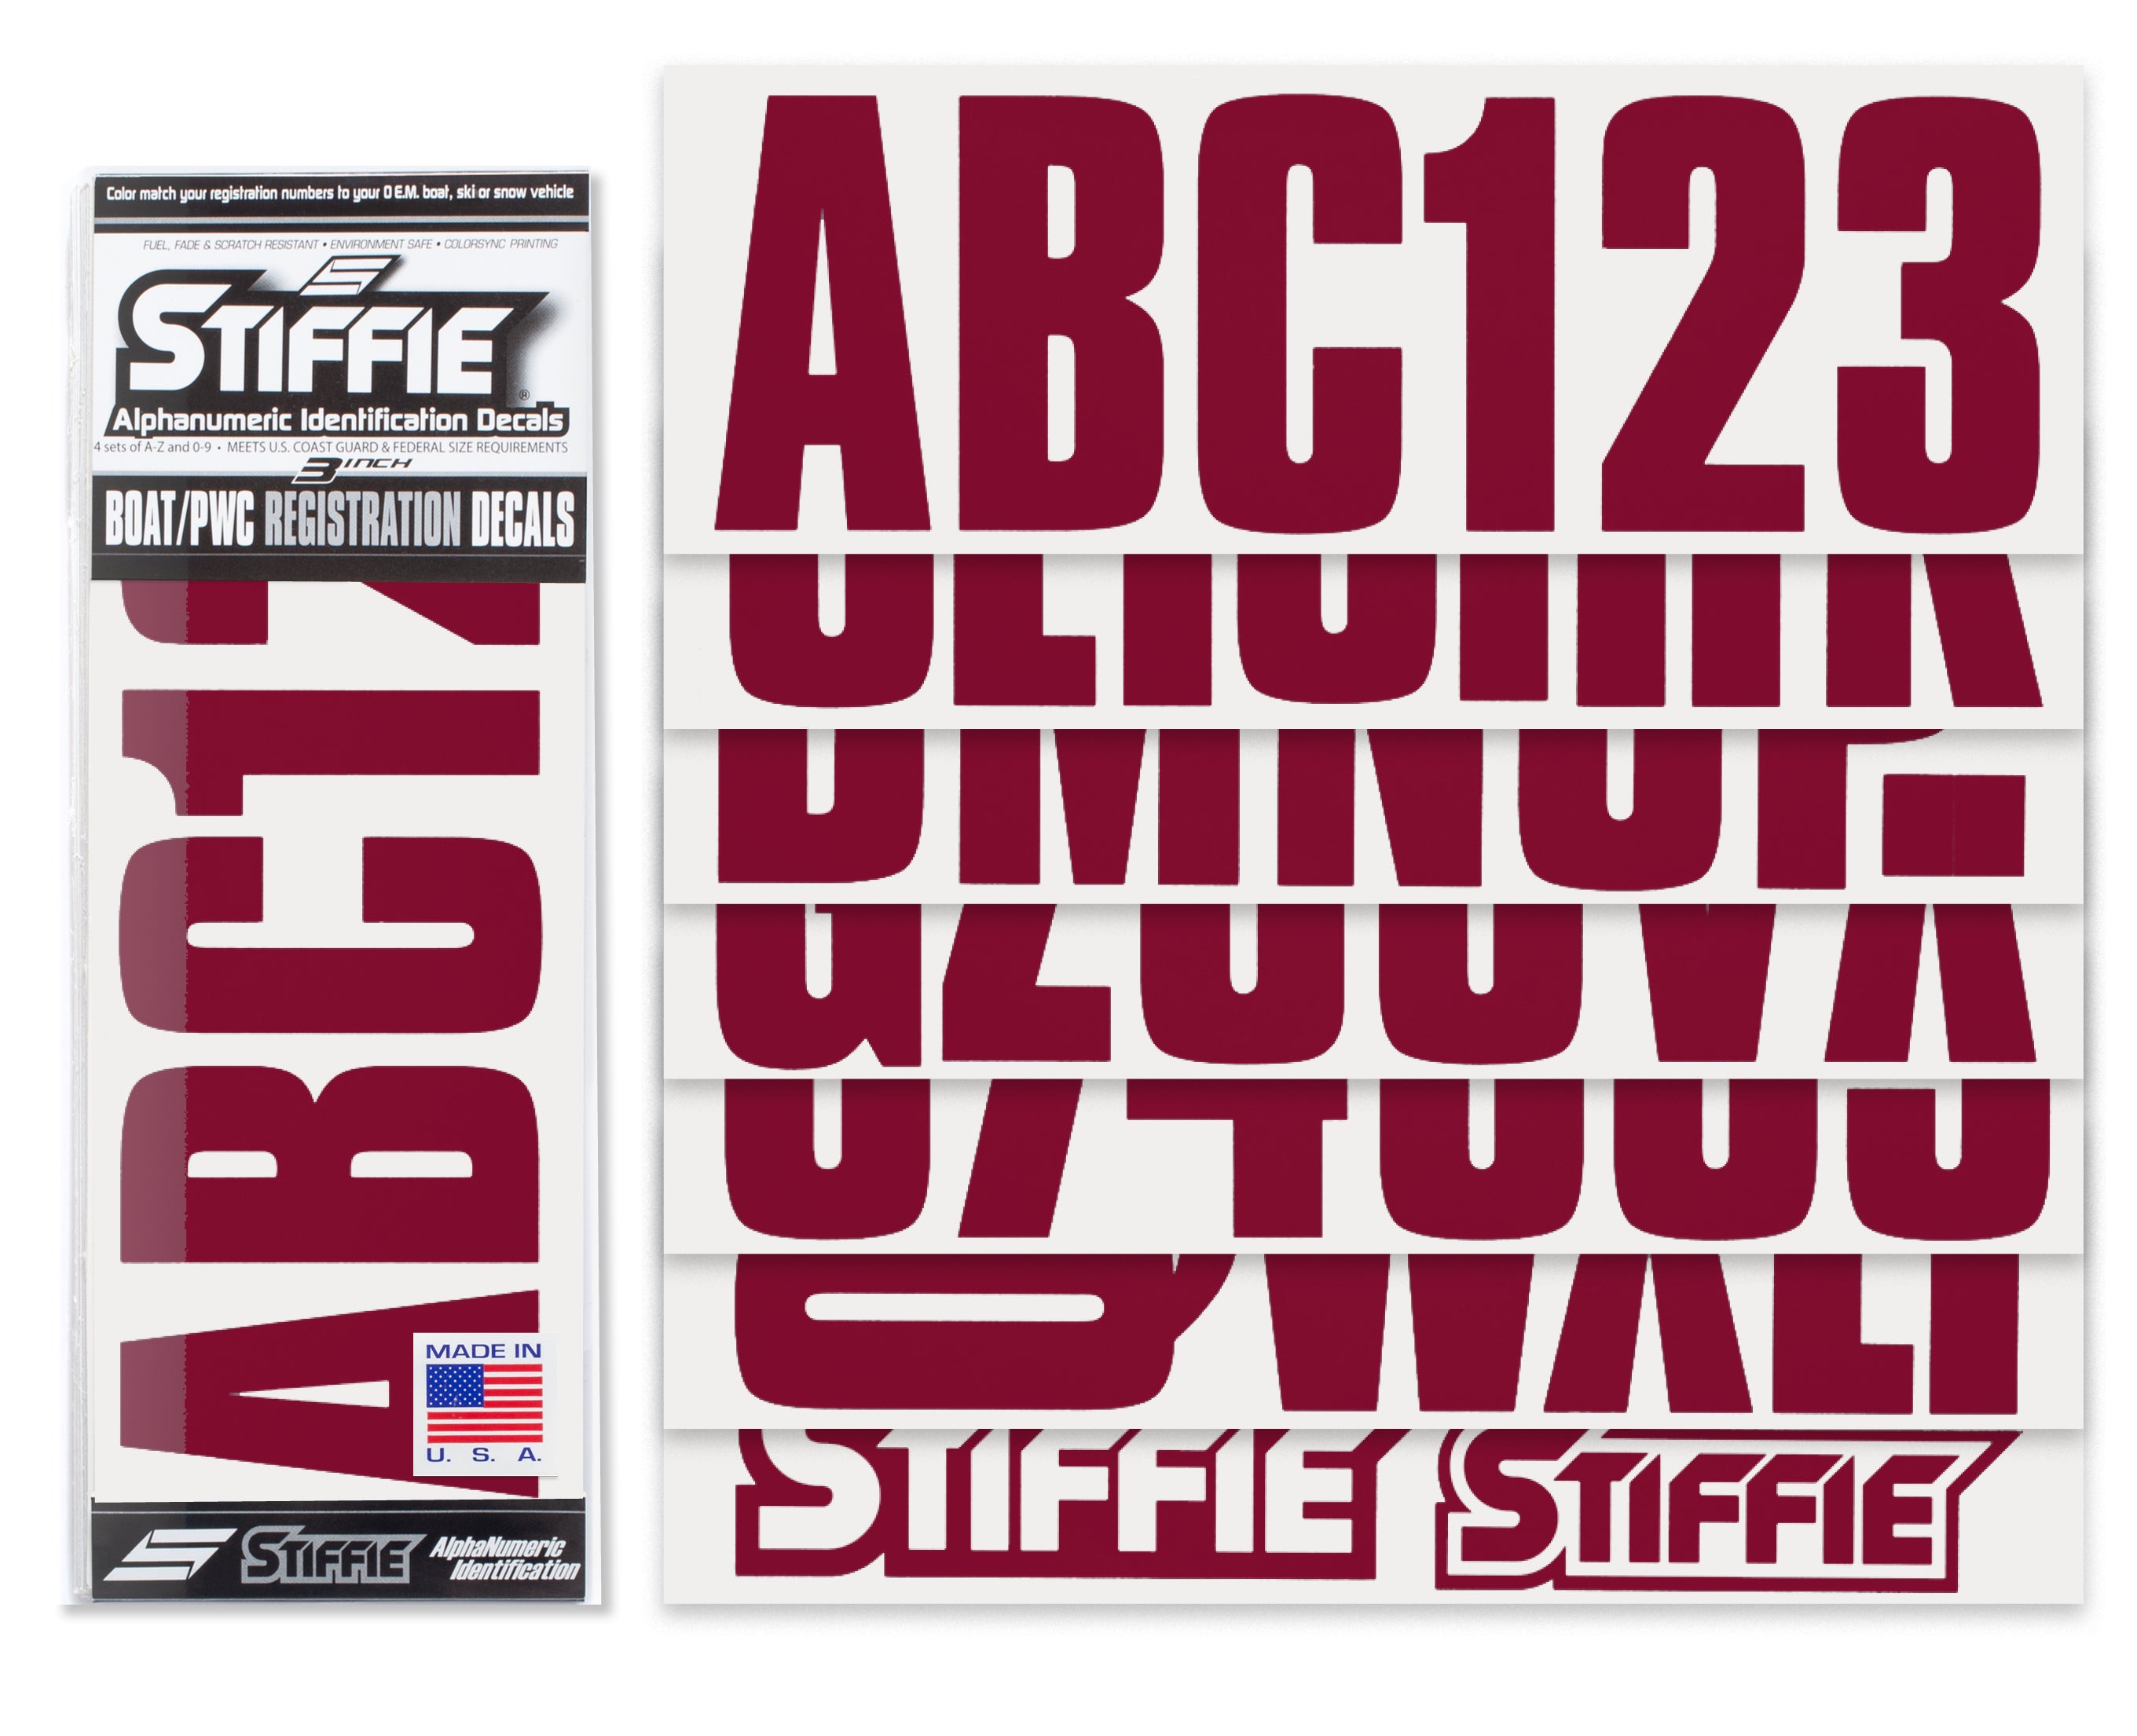 STIFFIE Uniline Deep Burgundy 3" ID Kit Alpha-Numeric Registration Identification Numbers Stickers Decals for Boats & Personal Watercraft